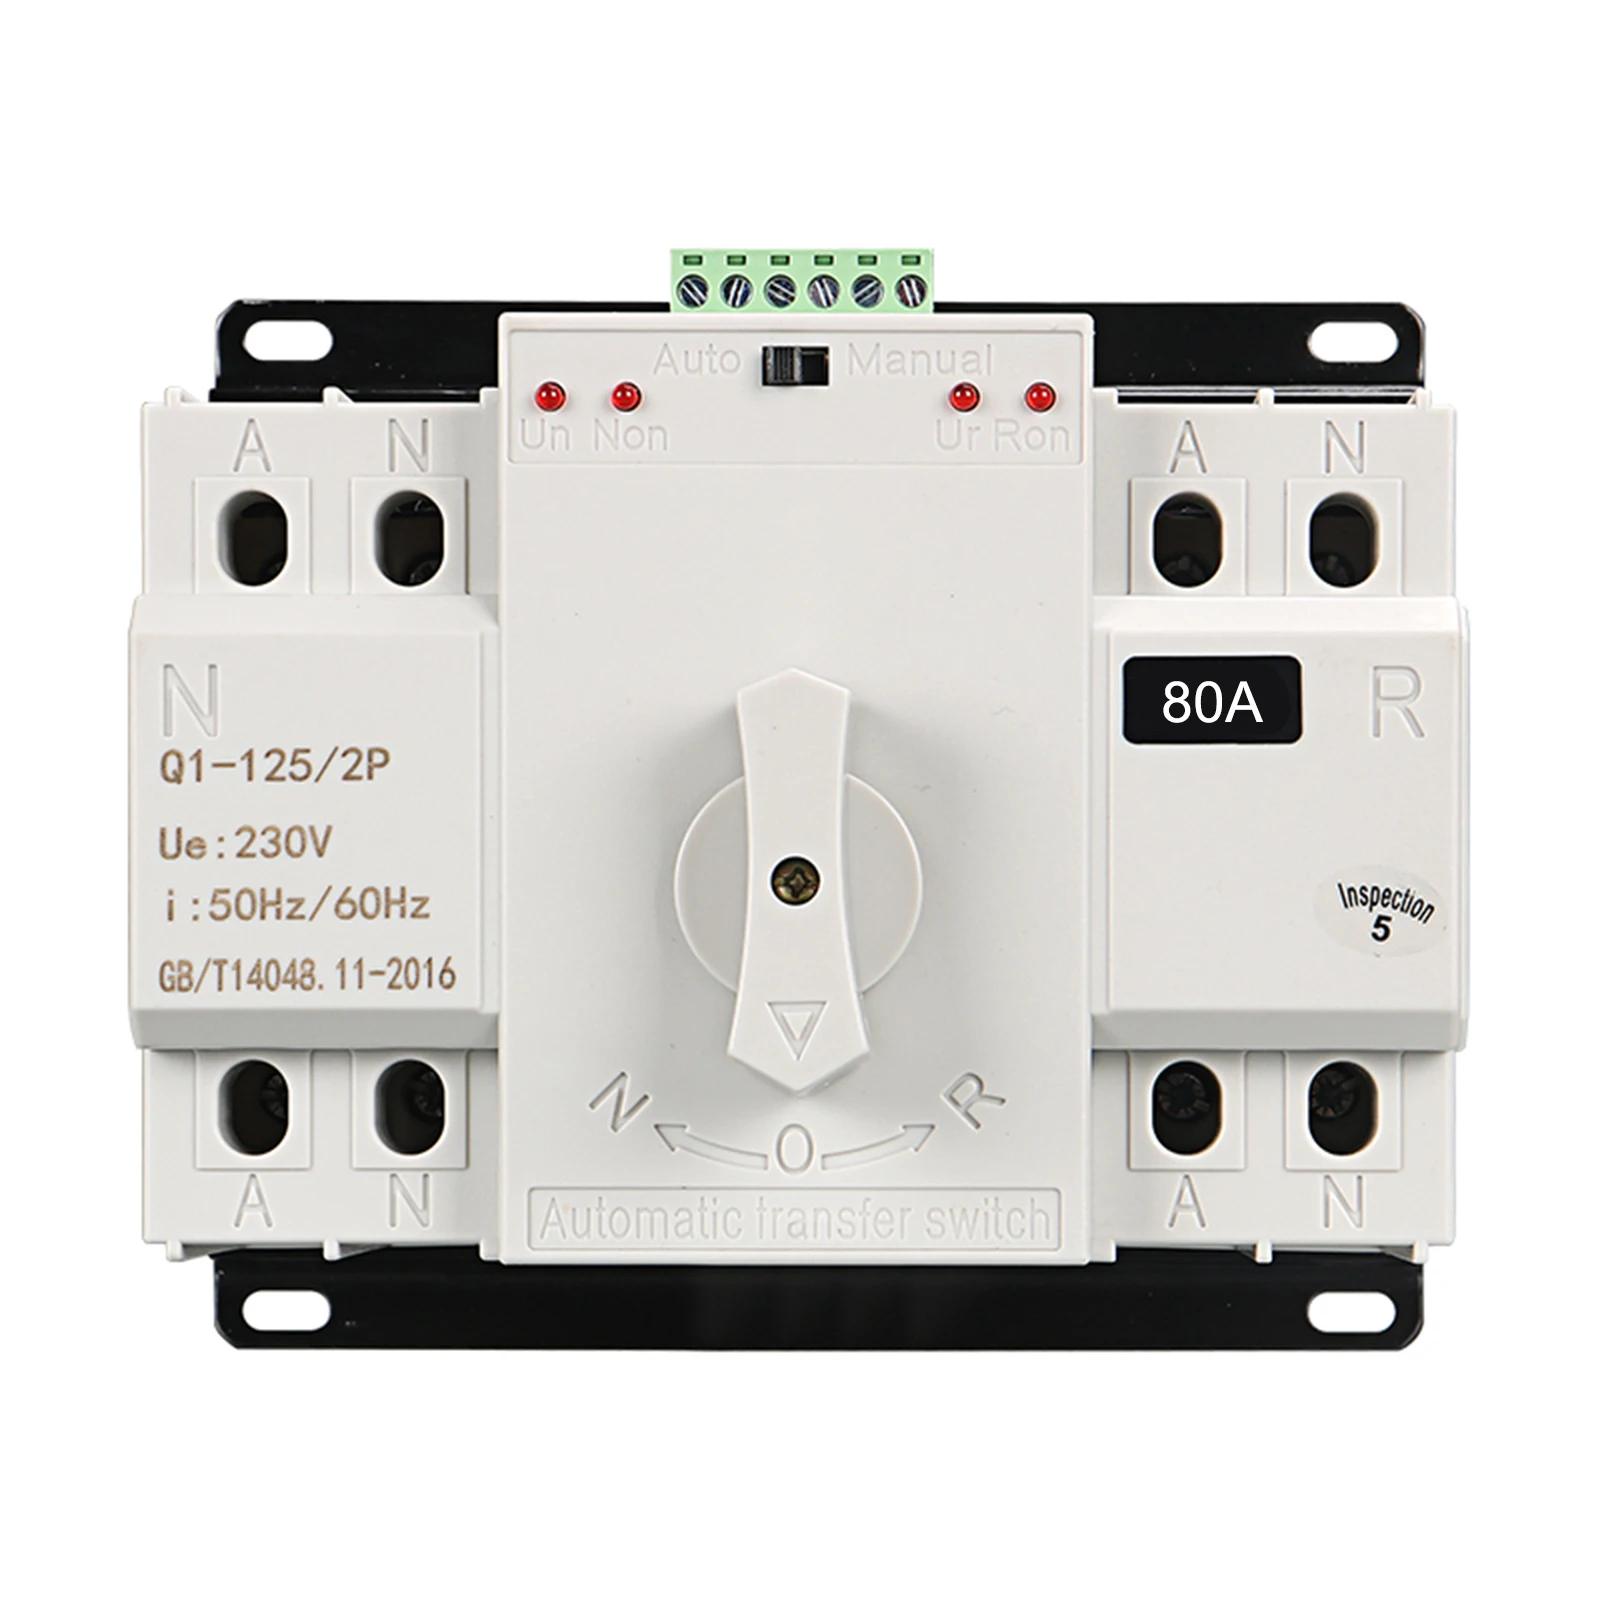 

Power Switch Mains Switch 1 Pc 125A/100A/80A 2P/4P Pole 400V Automatic Transfer Switch Millisecond Switching Brand New